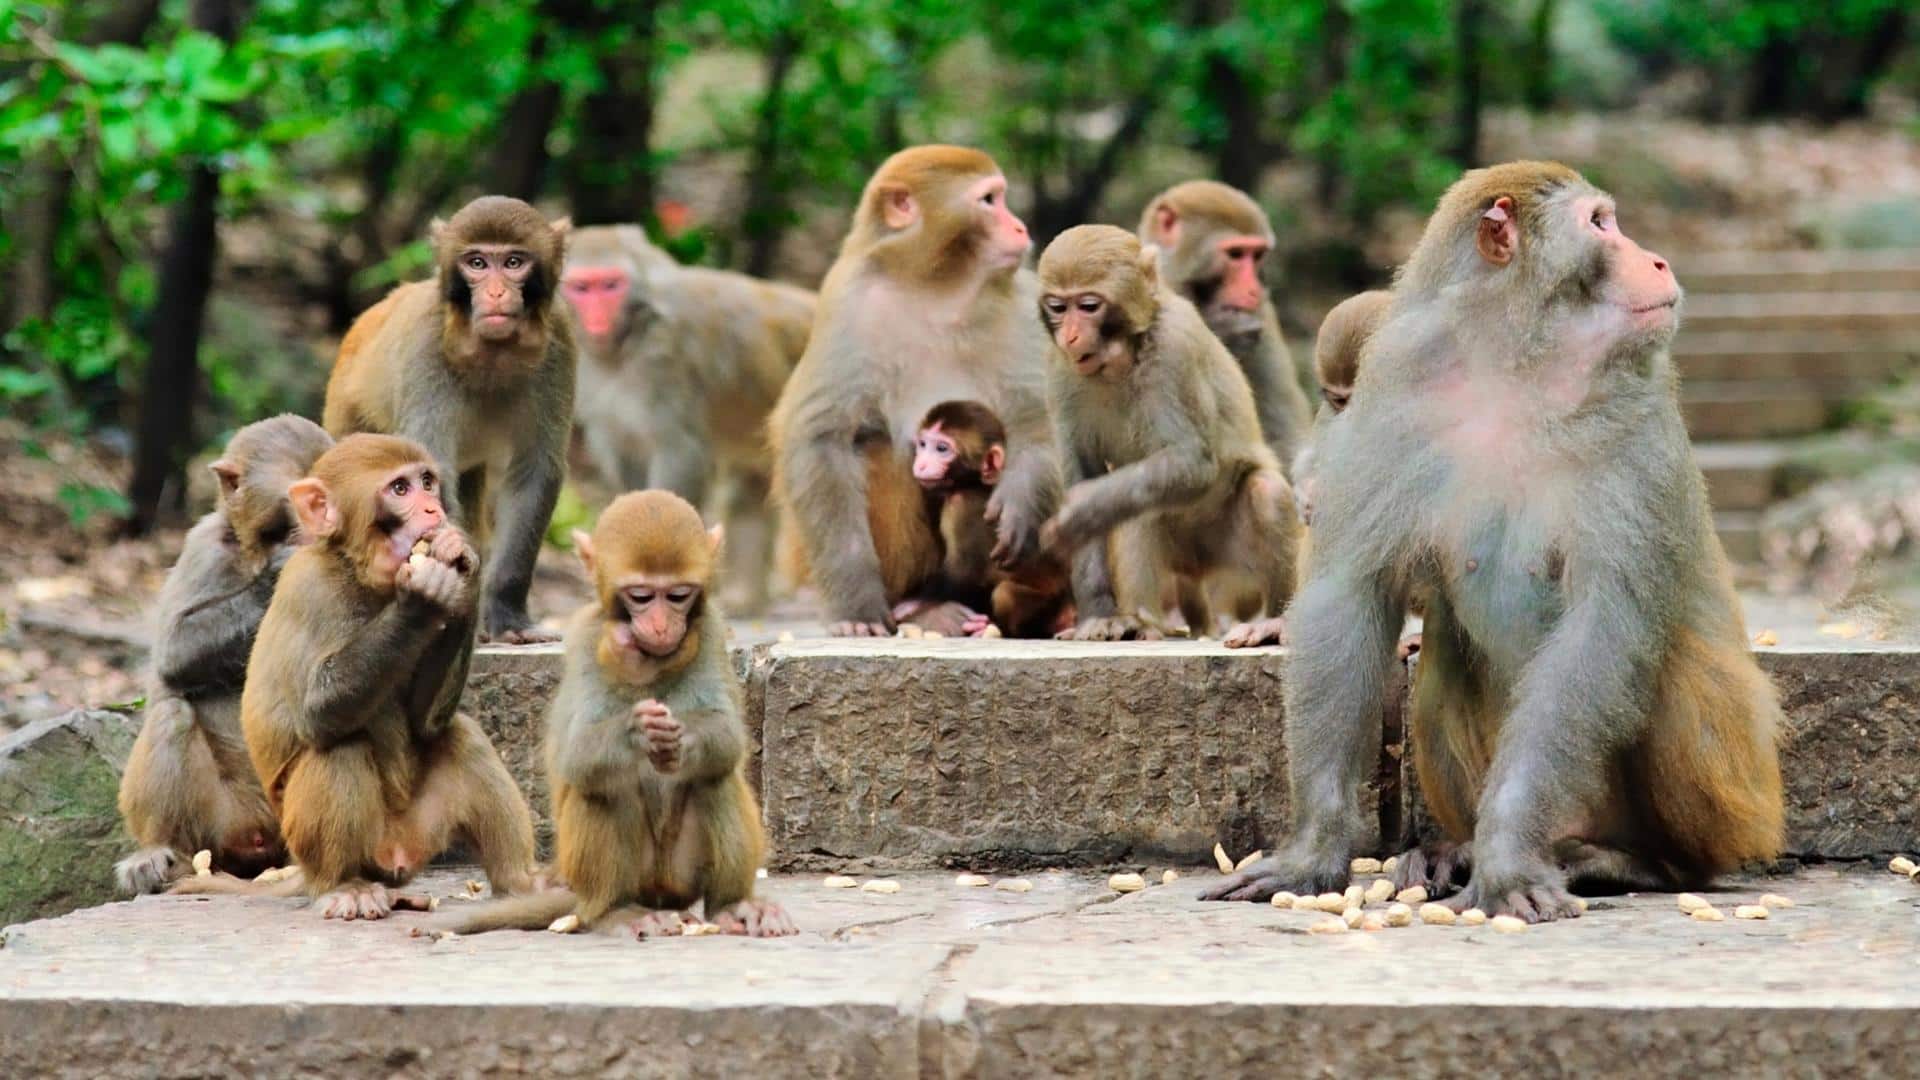 Monkey Day 2022: 5 interesting facts about our cousins